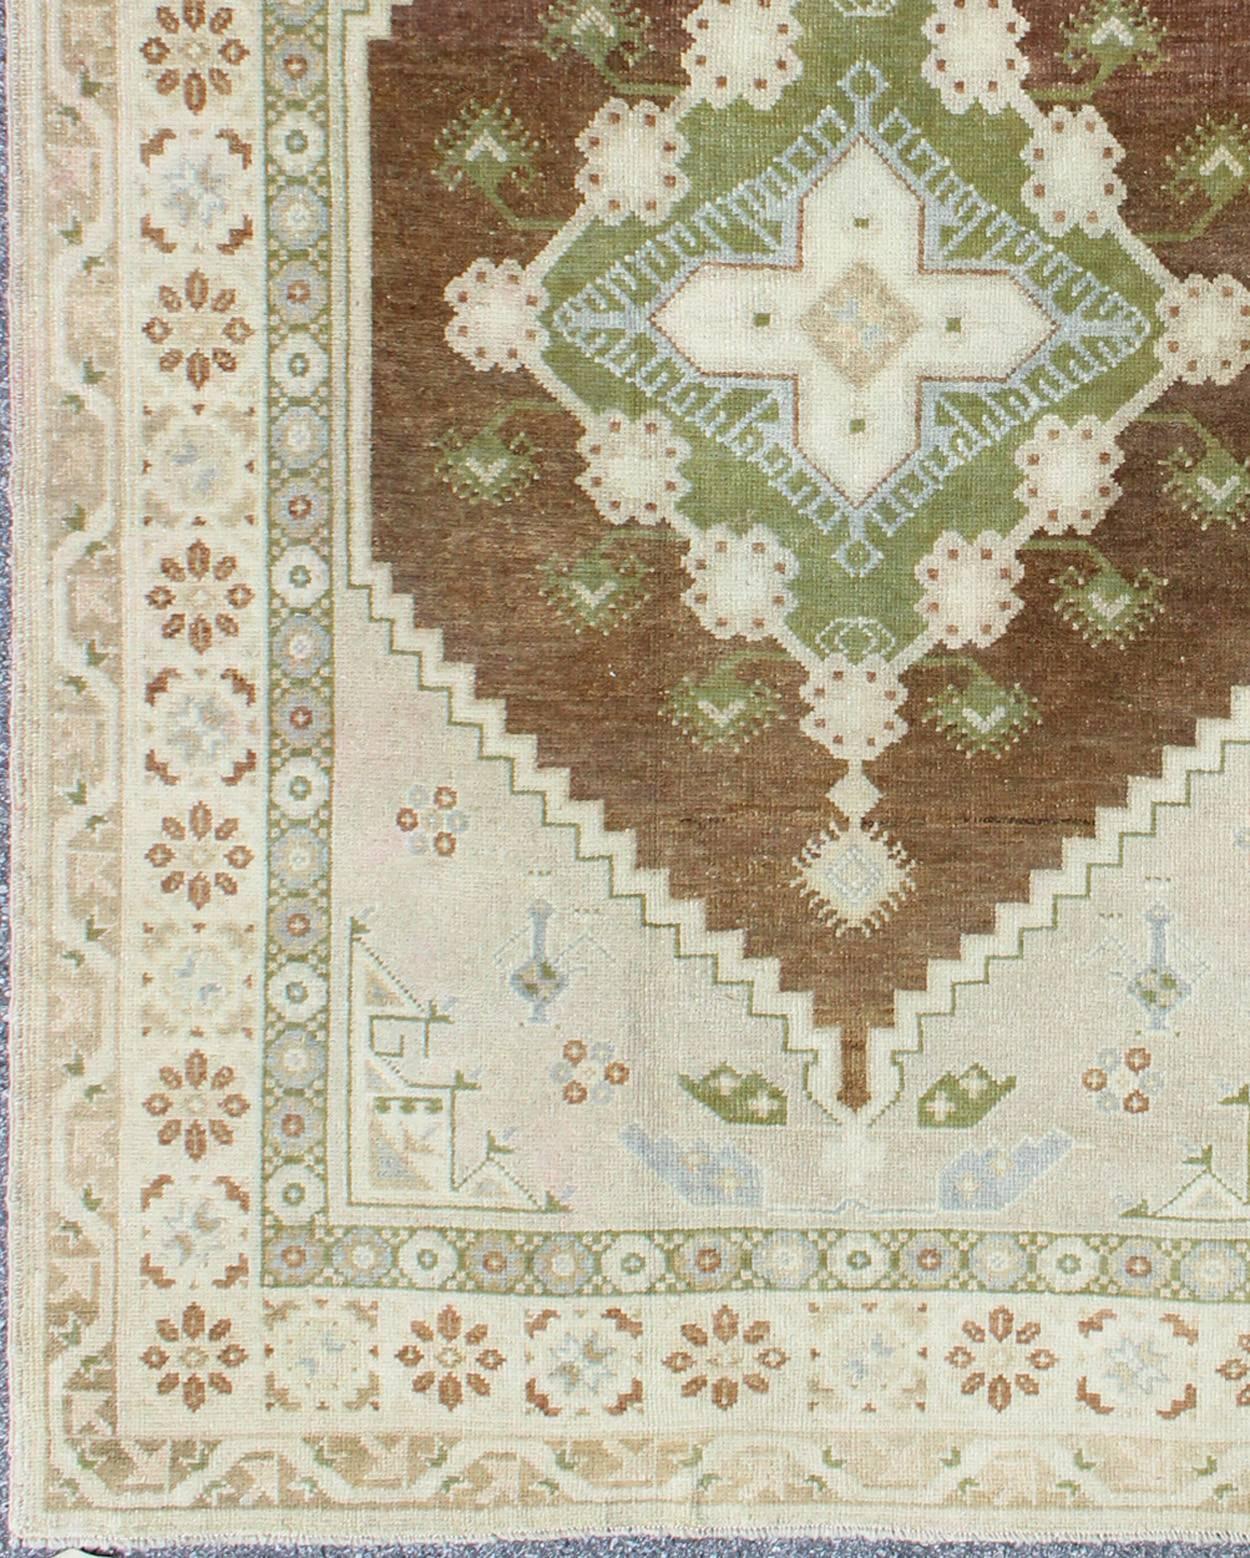 This Oushak rug features a unique blend of colors and an intricately beautiful design. The multi-layered diamond medallions are complemented by a symmetrical set of floral motifs. The various shades of ivory, taupe and cream blend beautifully with